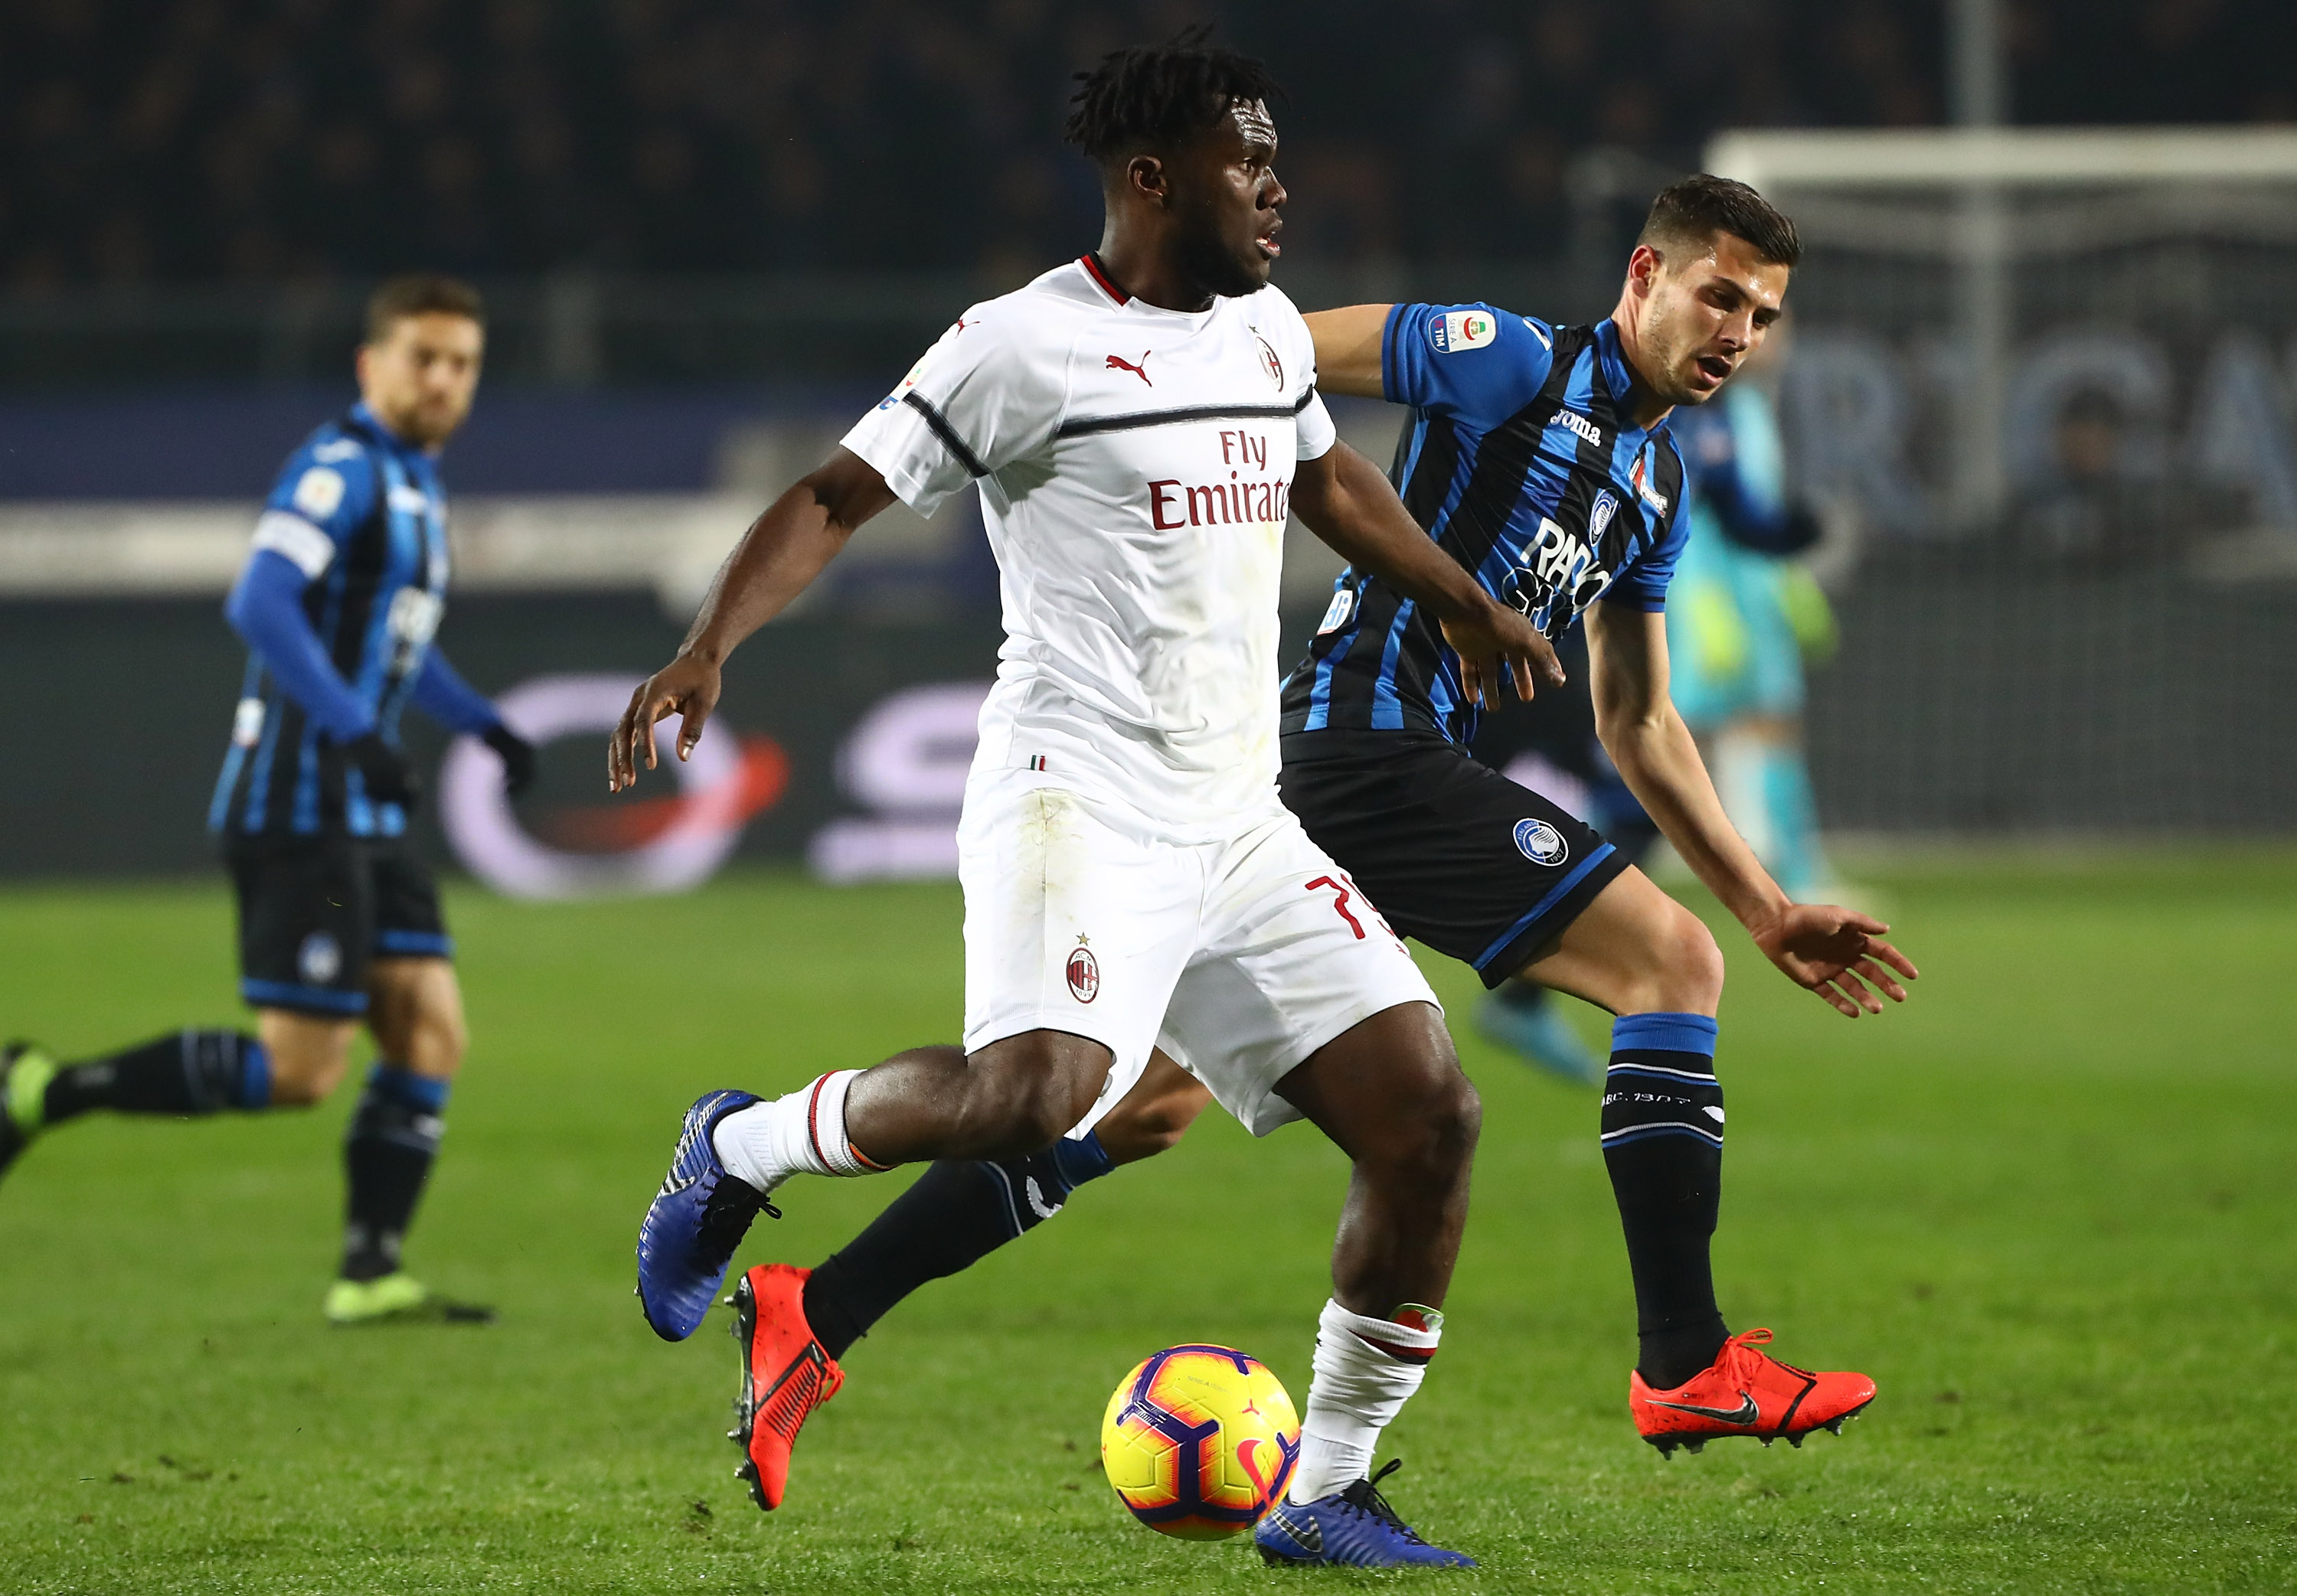 BERGAMO, ITALY - FEBRUARY 16: Franck Kessie of AC Milan competes for the ball with Remo Freuler (back) of Atalanta BC during the Serie A match between Atalanta BC and AC Milan at Stadio Atleti Azzurri d'Italia on February 16, 2019 in Bergamo, Italy. (Photo by Marco Luzzani/Getty Images)